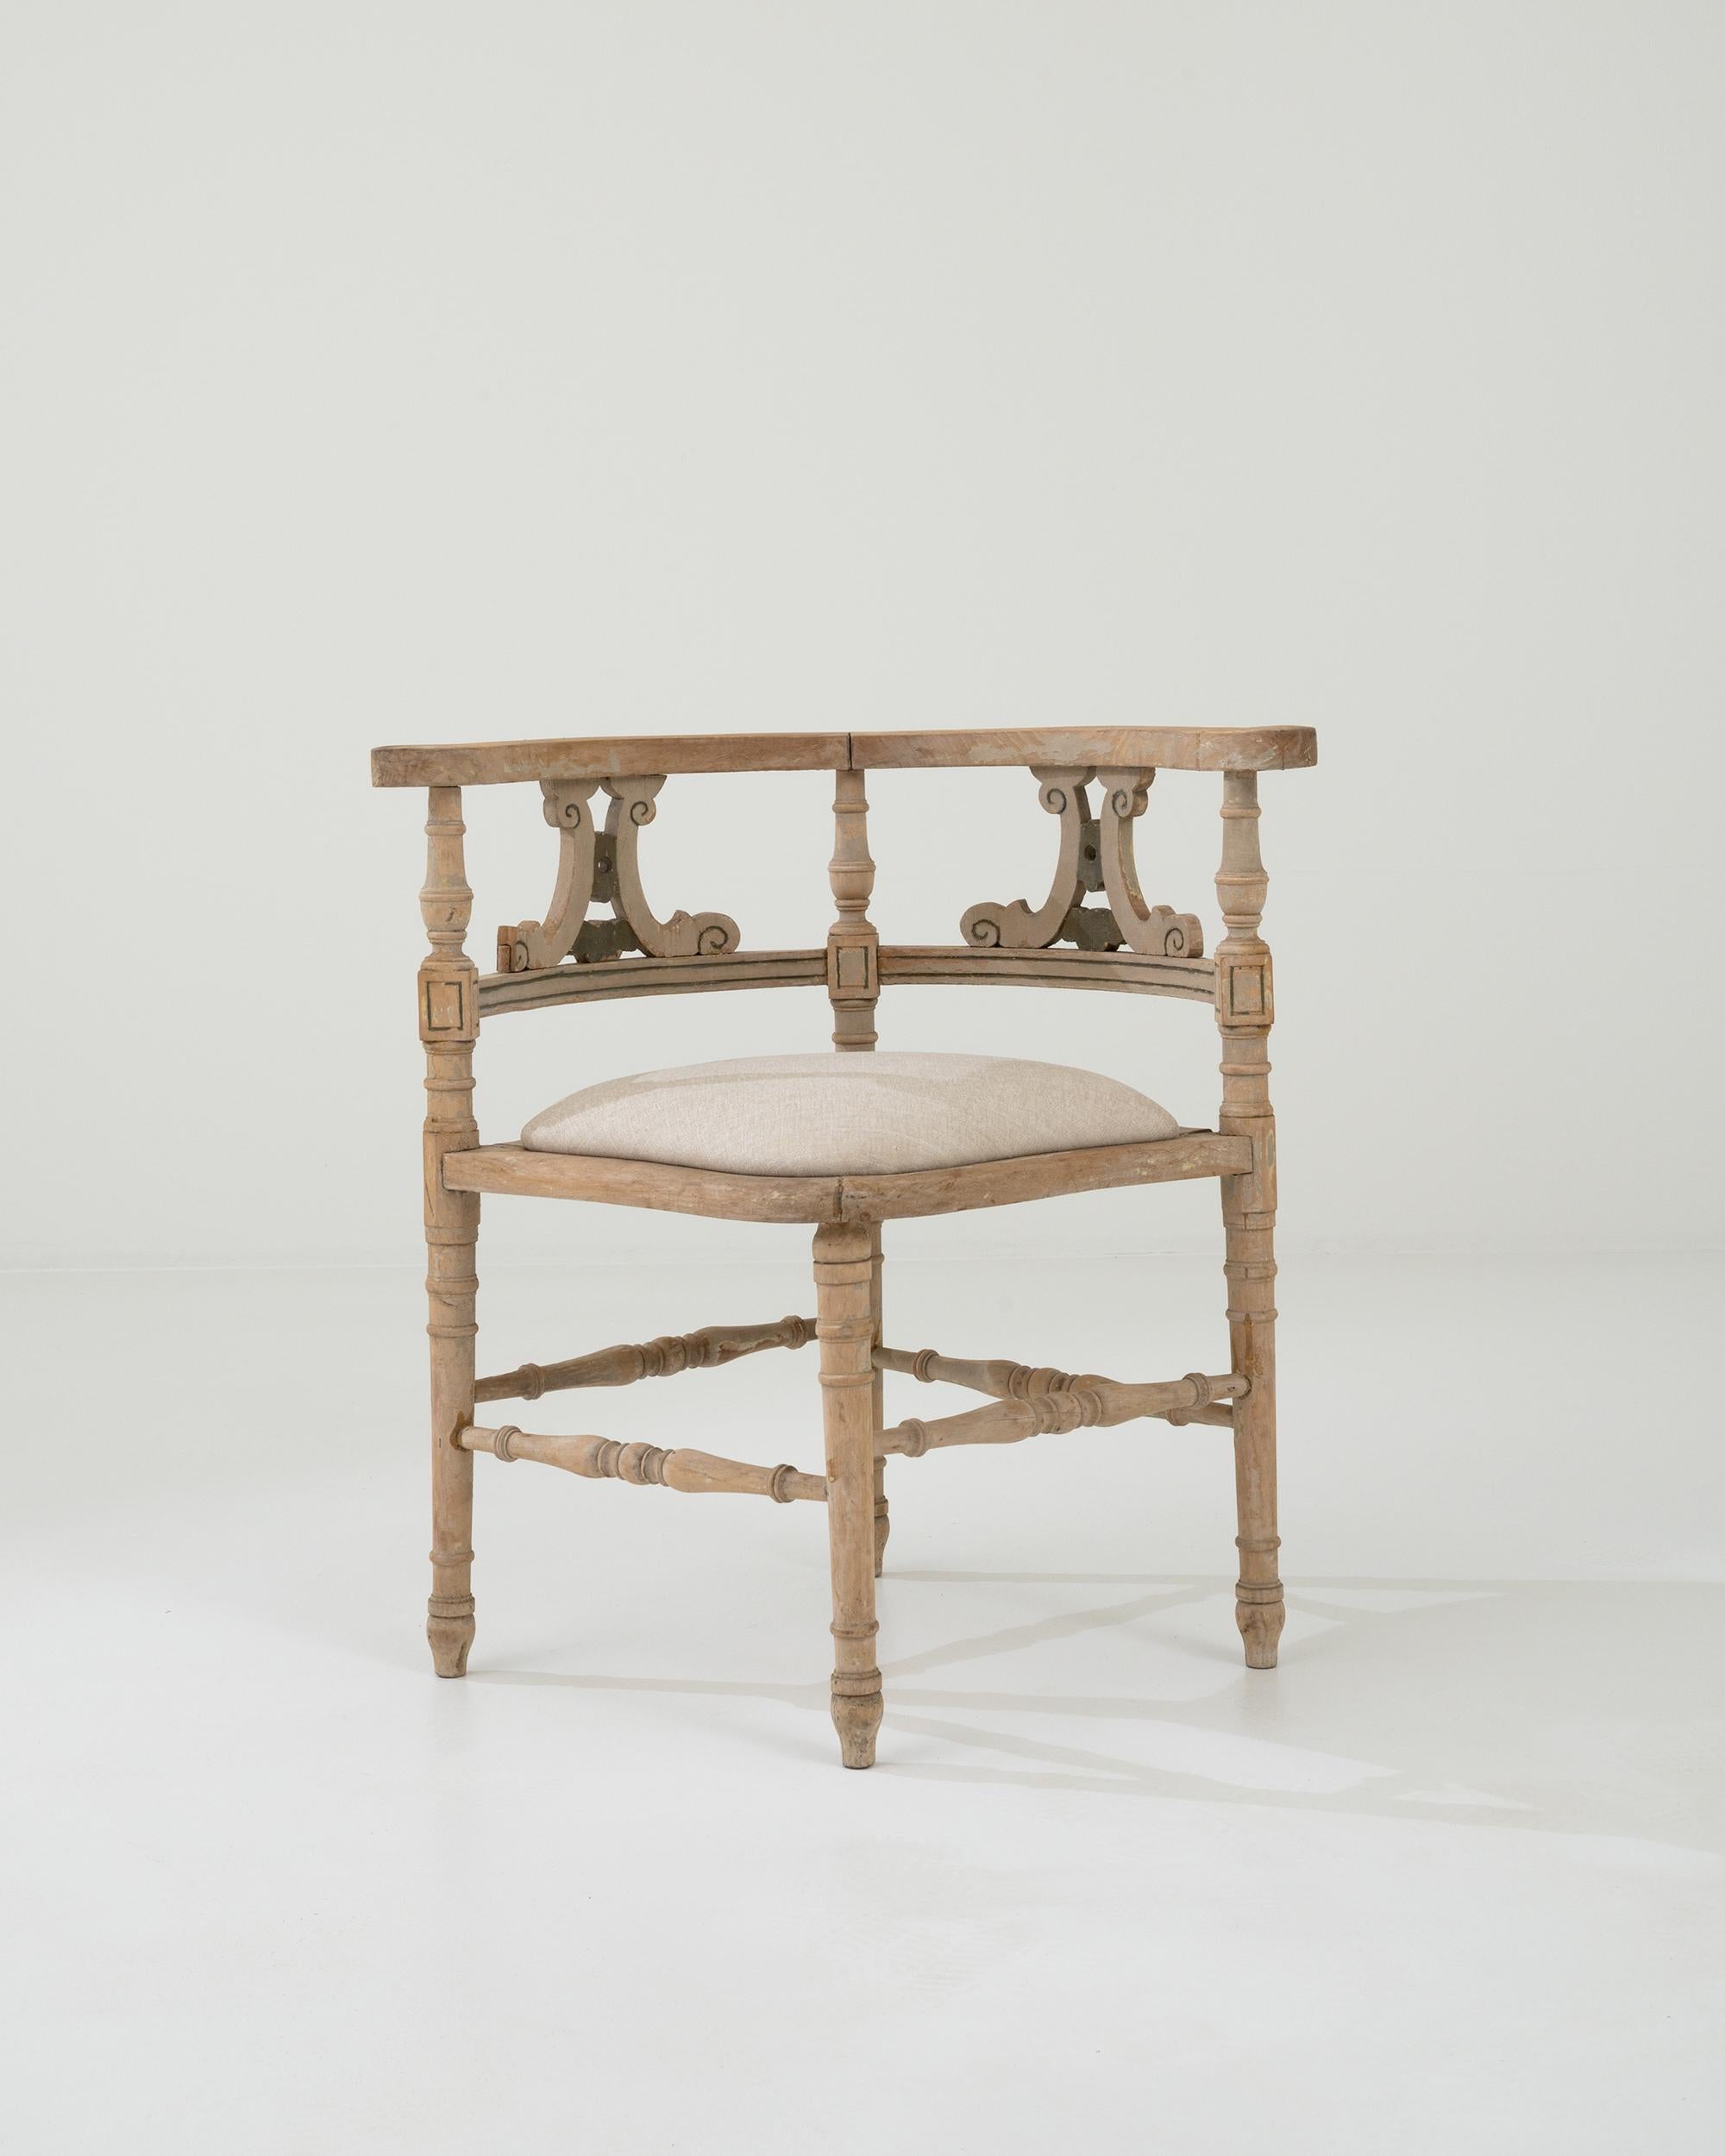 The intriguing shape and soothing natural finish of this carved oak corner chair makes it a vintage find to treasure. Built in France at the turn of the century, the seat is arranged in a diamond formation, with one corner at the front, and an